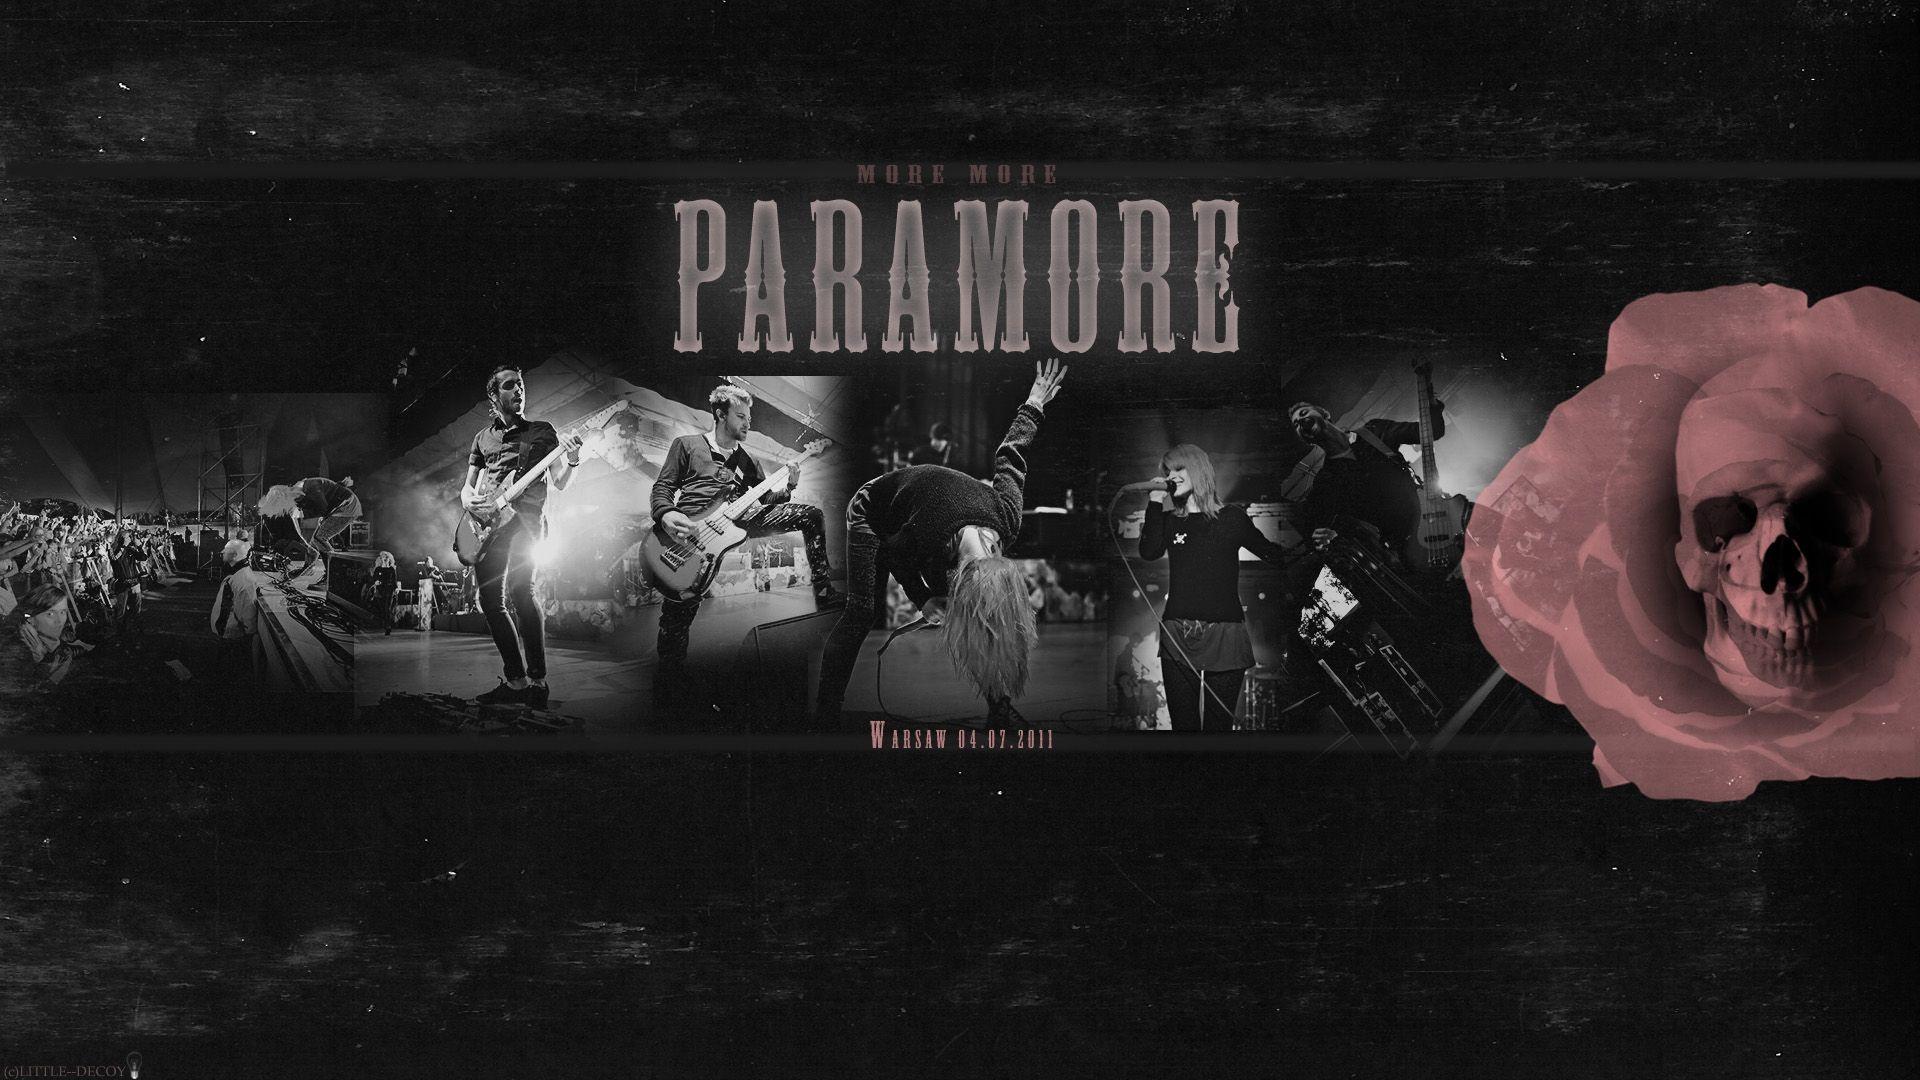 Paramore Band Concert Wallpaper 1920x1080 px Free Download